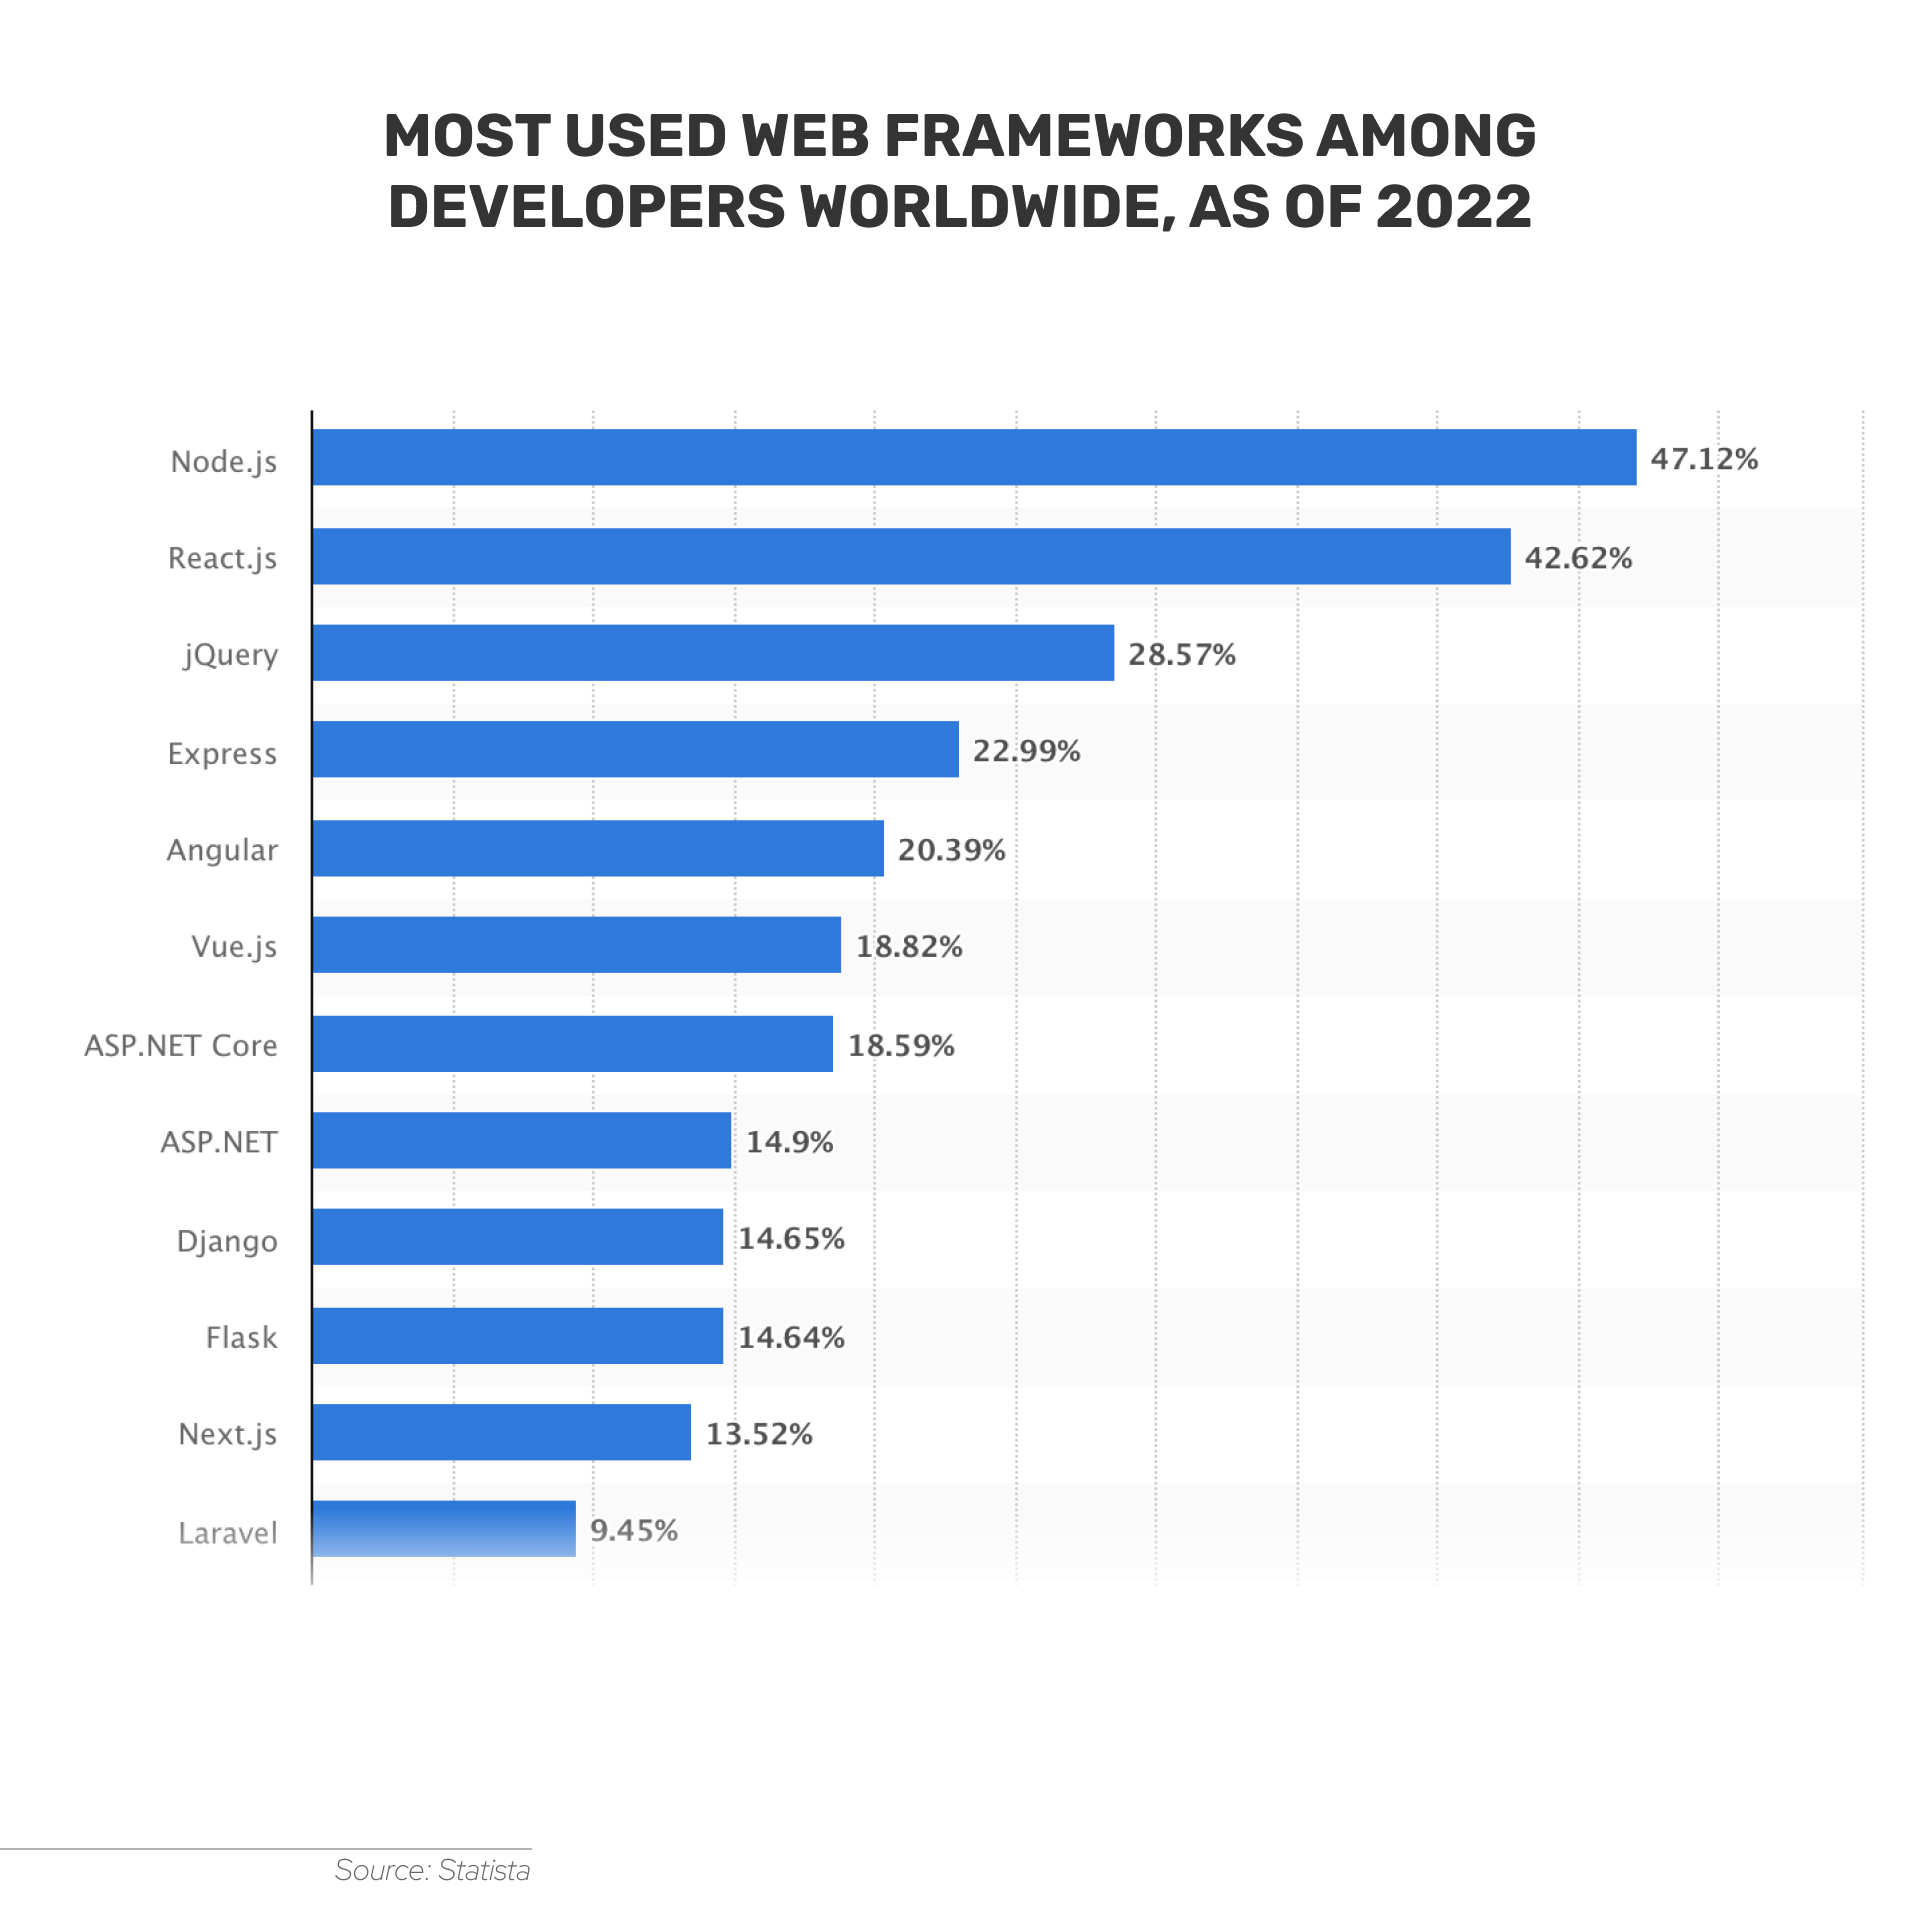 Statista names Node.js the most used web framework as of 2022.